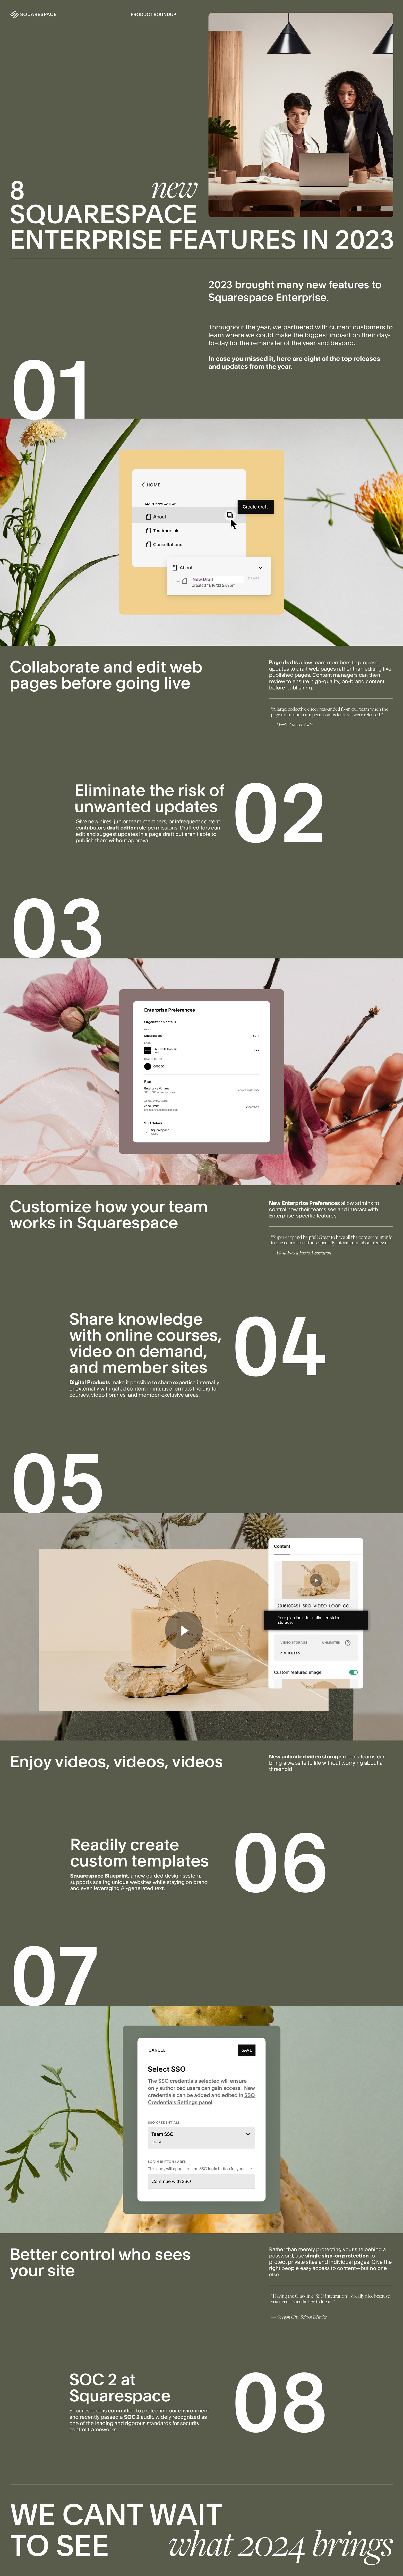 Infographic sharing 8 new Squarespace Enterprise features from 2023, including page drafts functionality and draft editor role